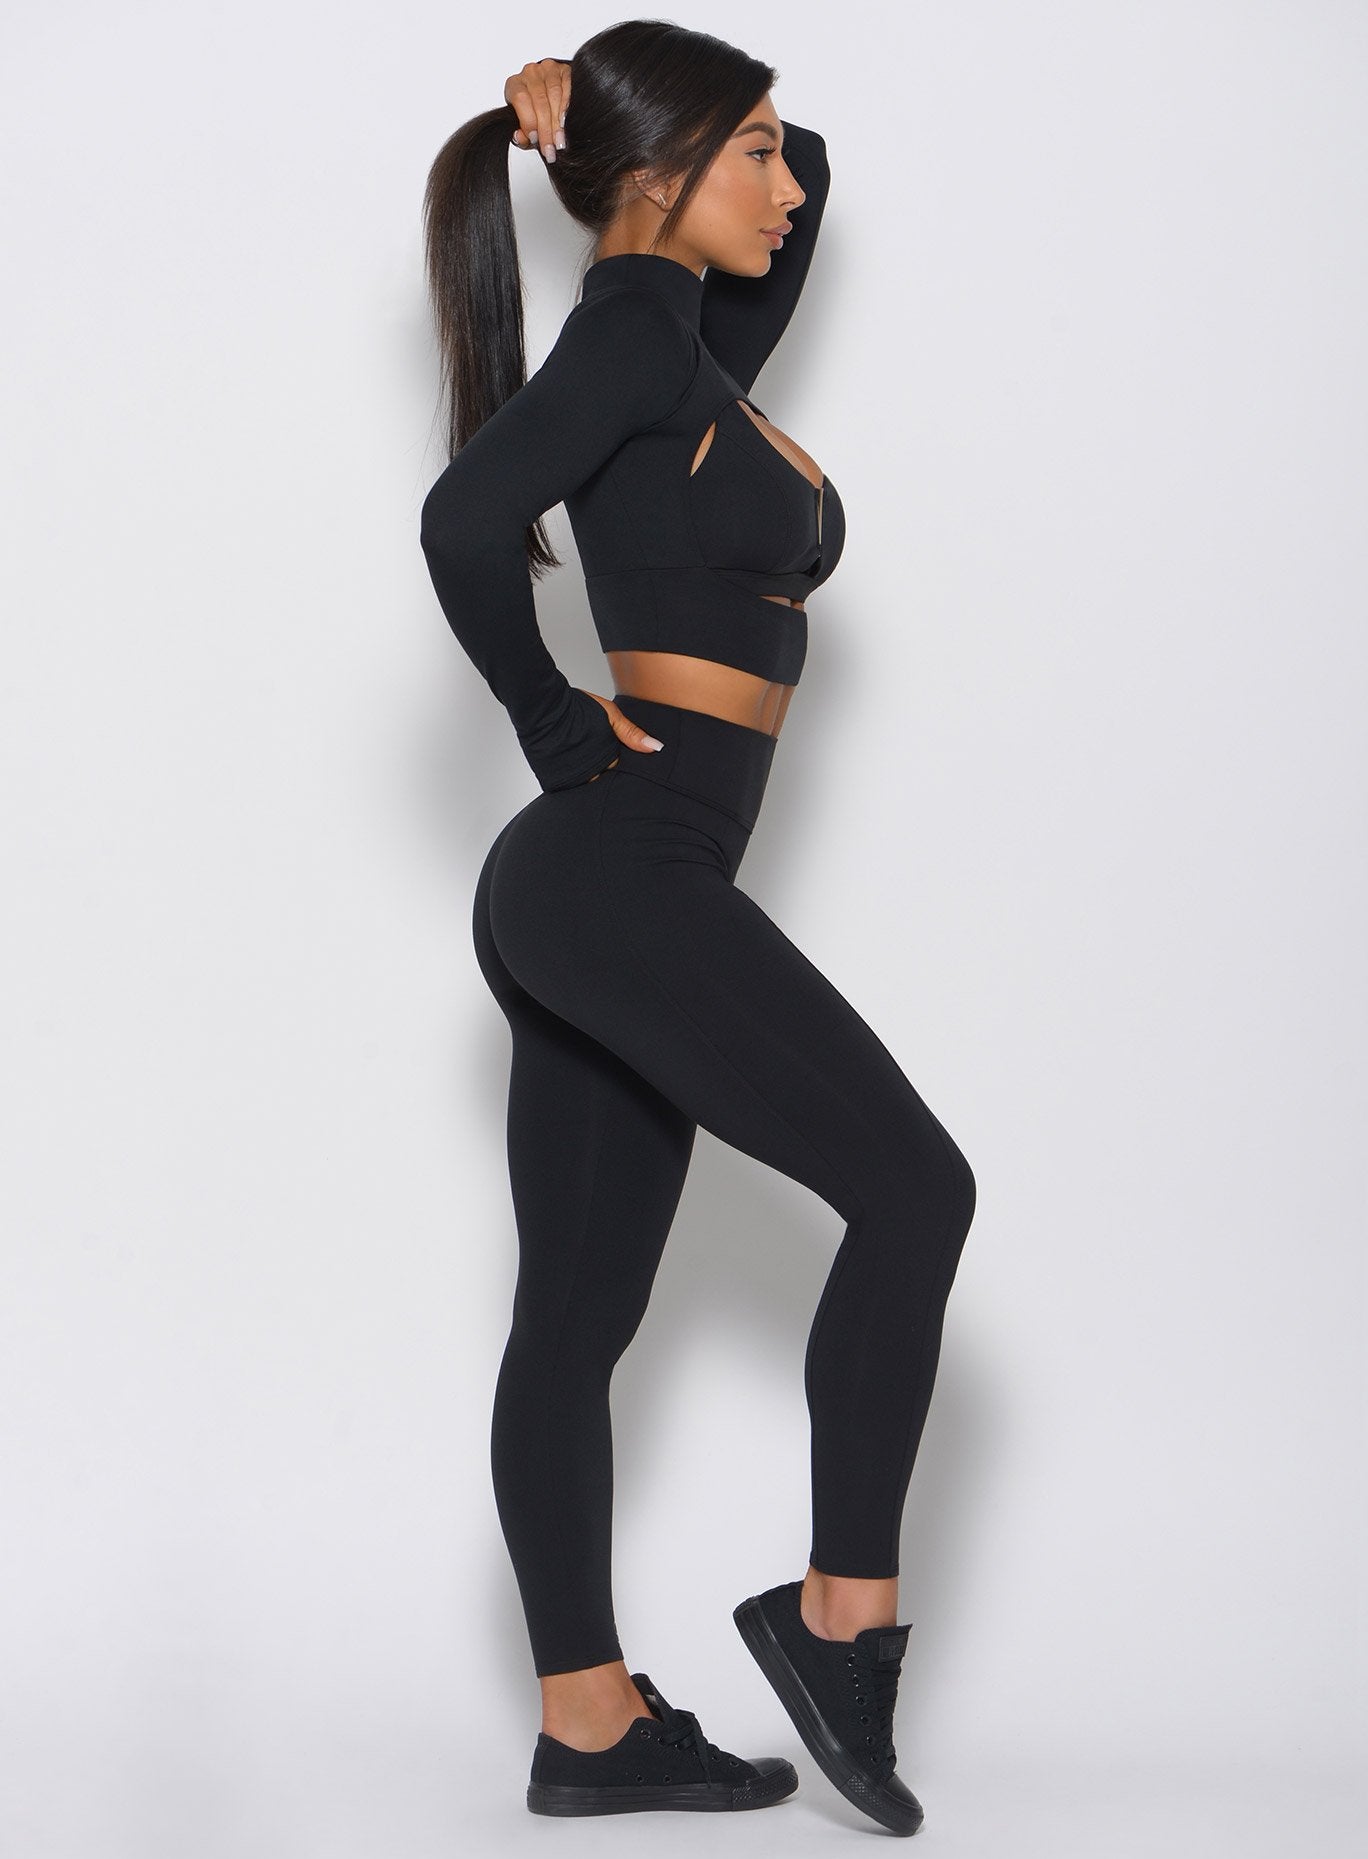 Right side view of the model wearing the black pullover